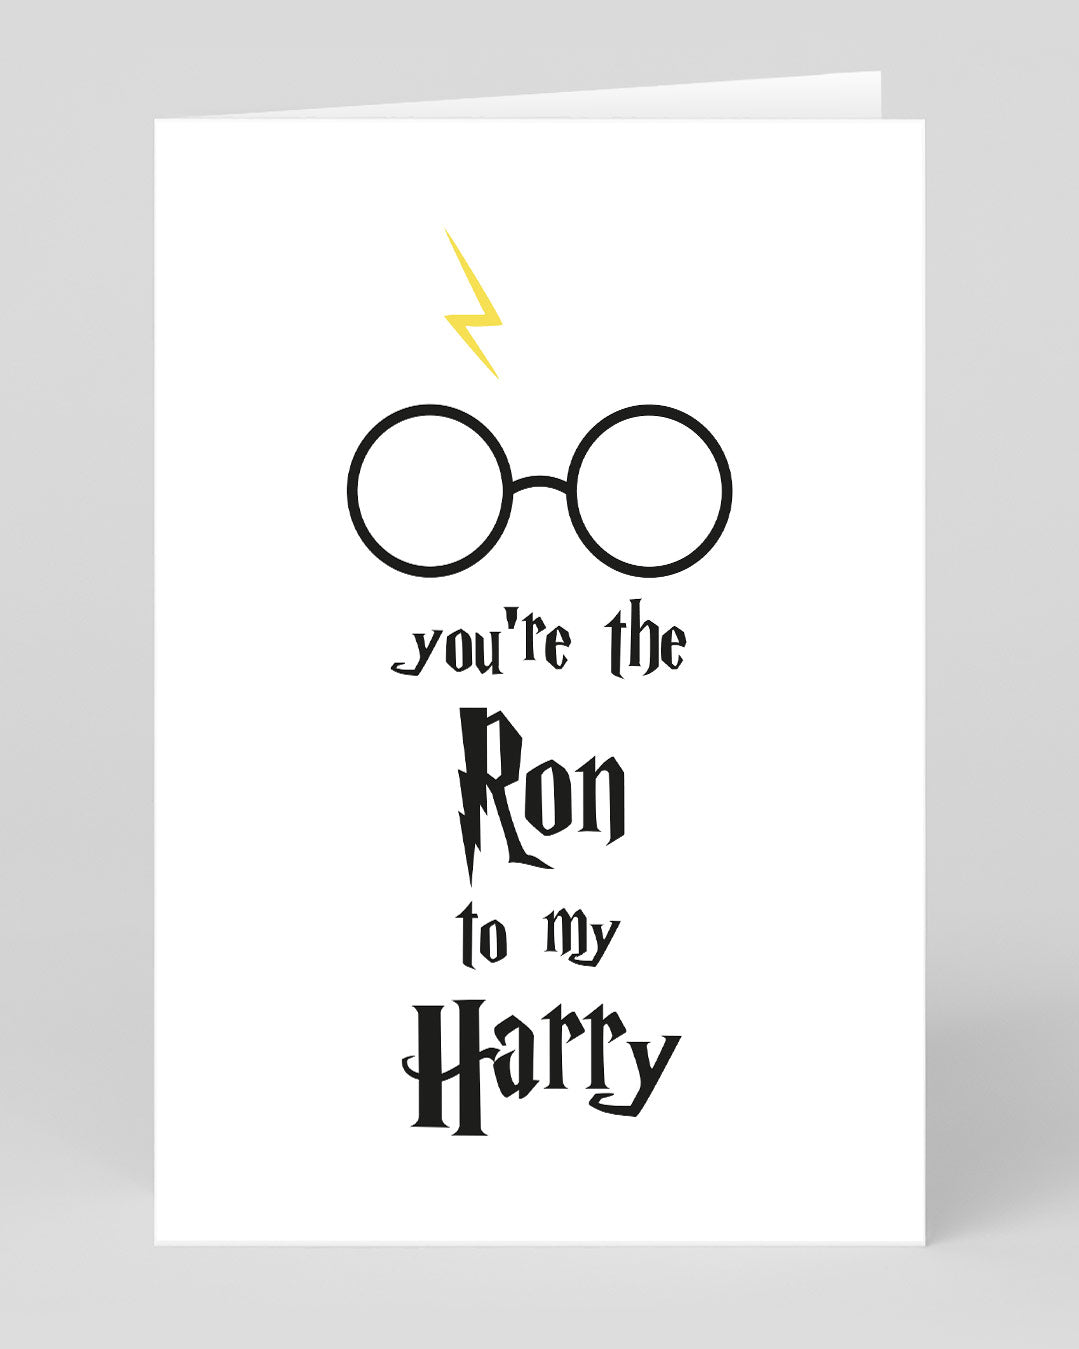 Valentine’s Day | Valentines Card For Harry Potter Fans | Ron To My Harry Greeting Card | Ohh Deer Unique Valentine’s Card for Him or Her | Made In The UK, Eco-Friendly Materials, Plastic Free Packaging